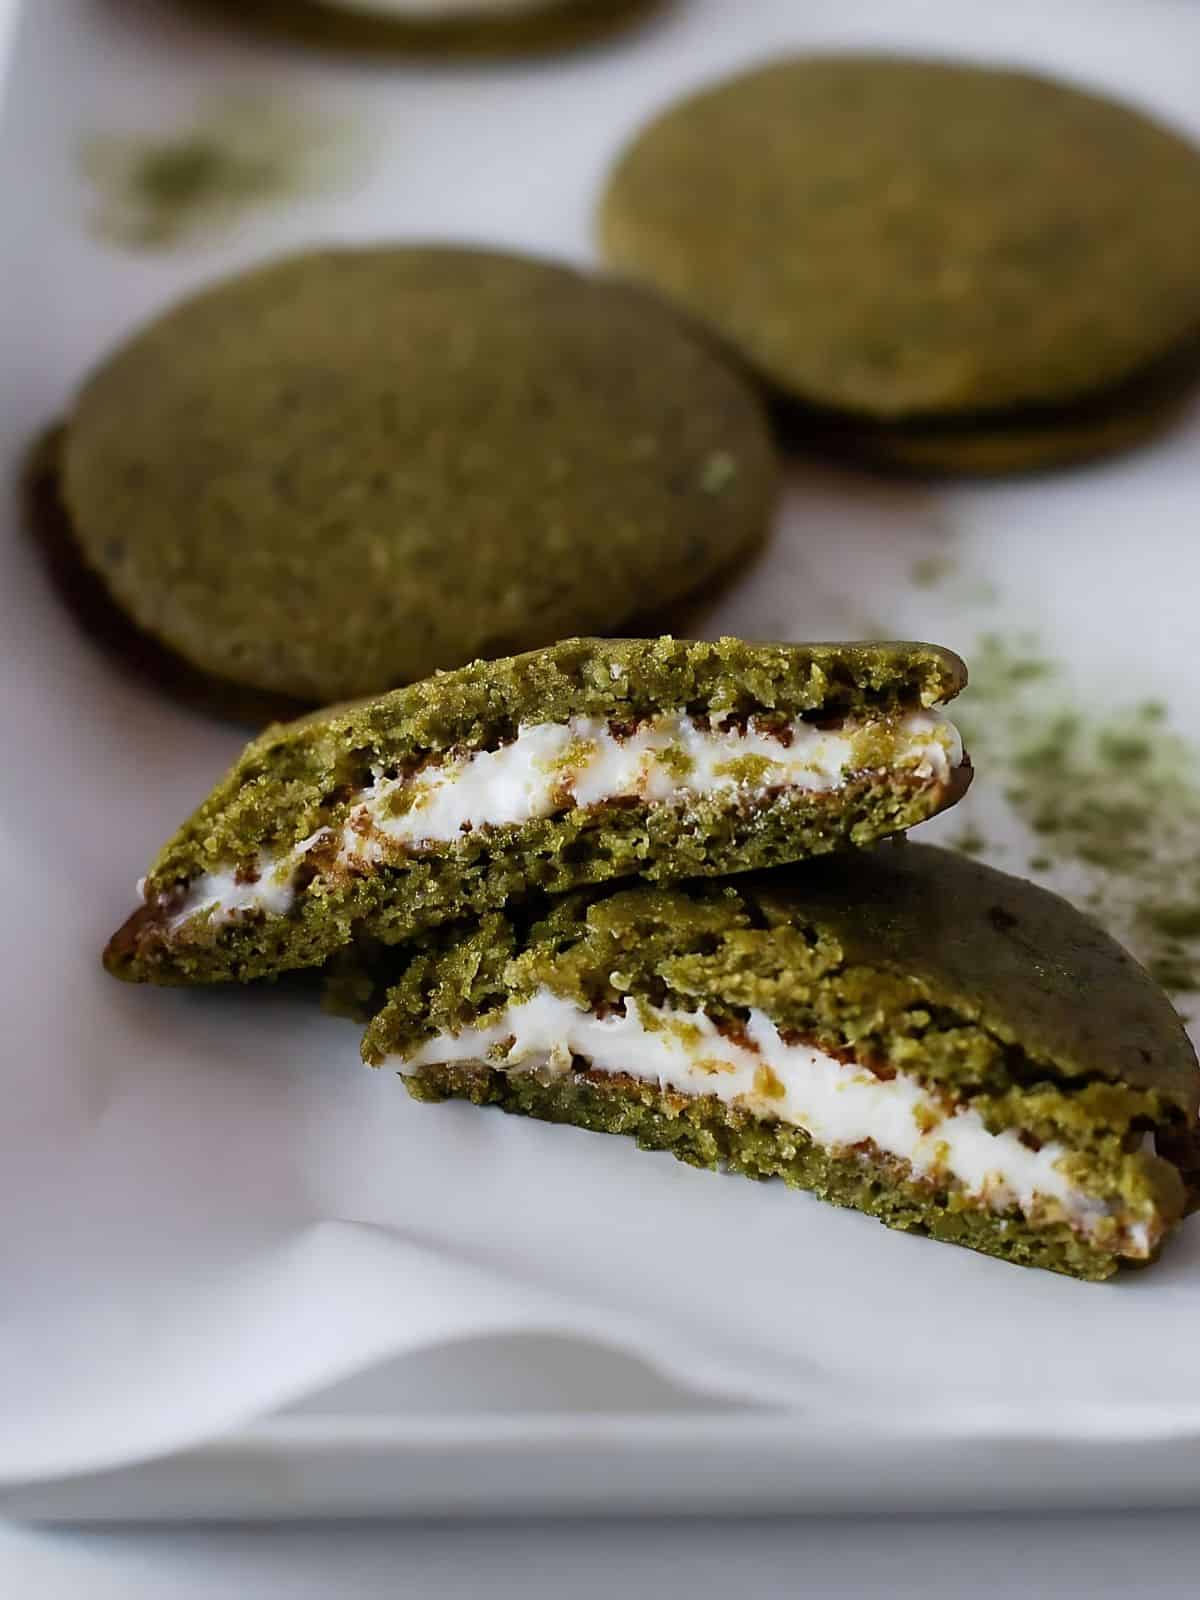 A sliced matcha whoopie pie next to whole matcha whoopie pies.